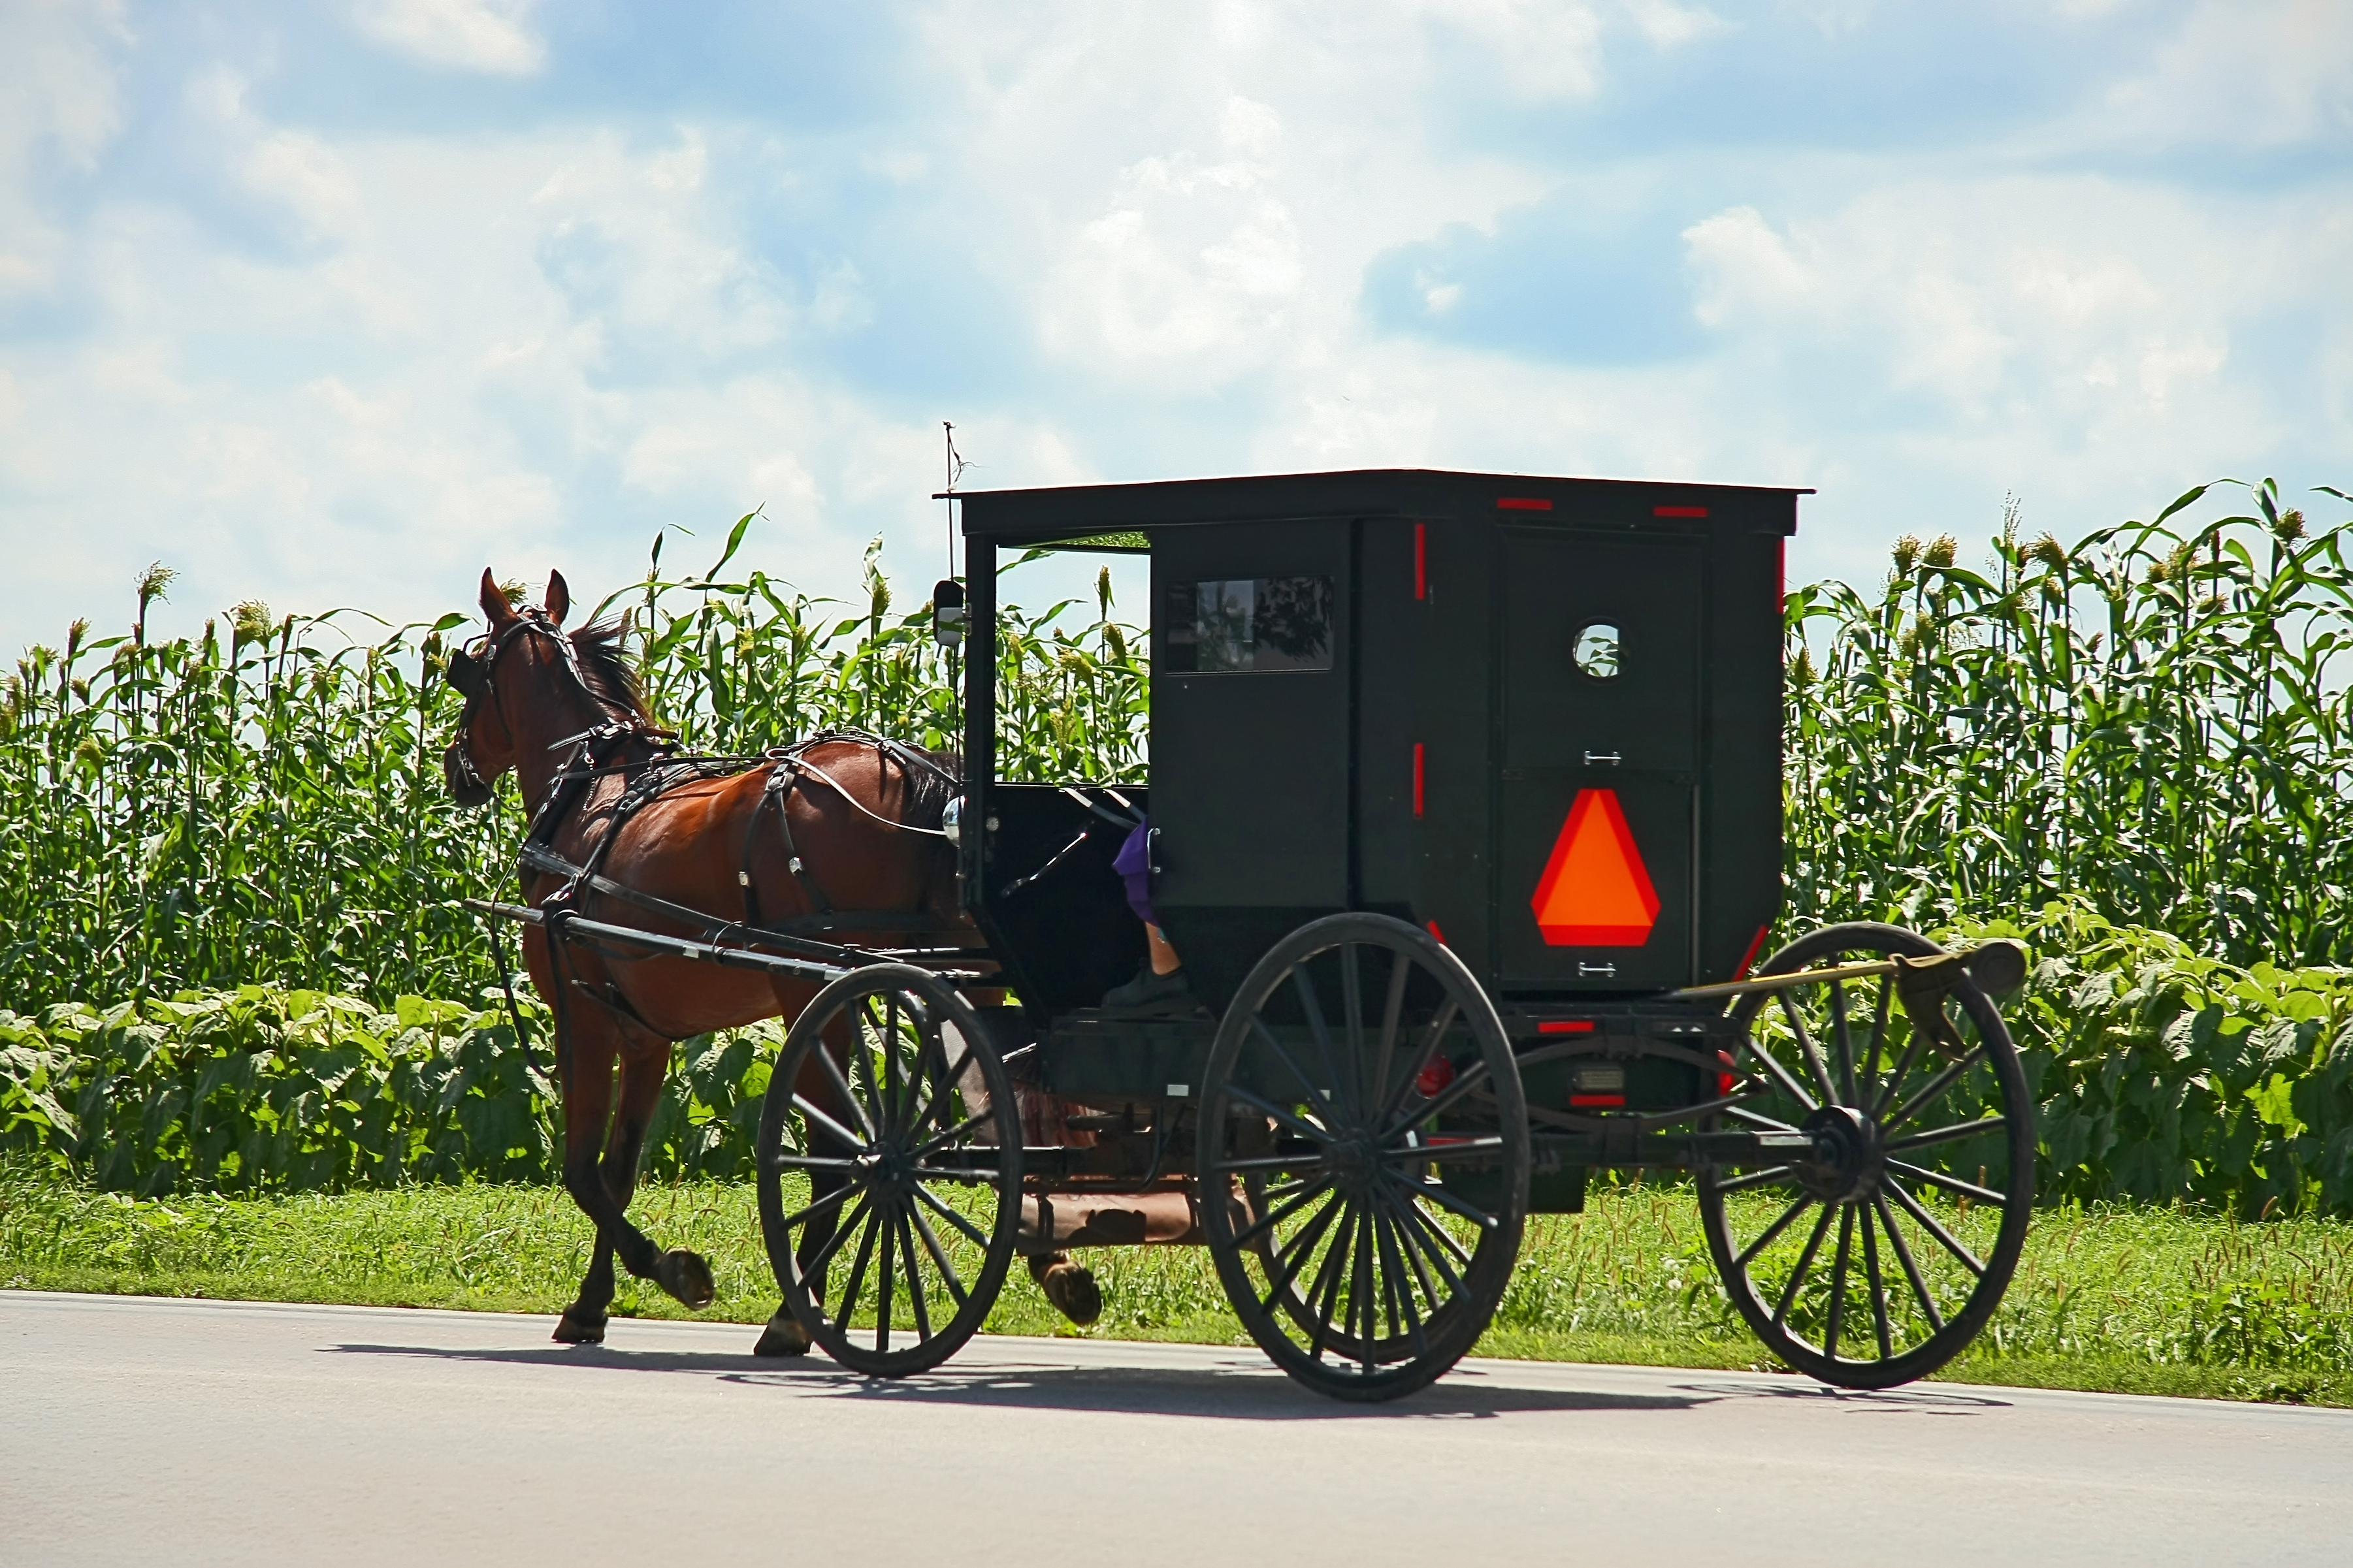 horse with a black buggy on a path through cornfields